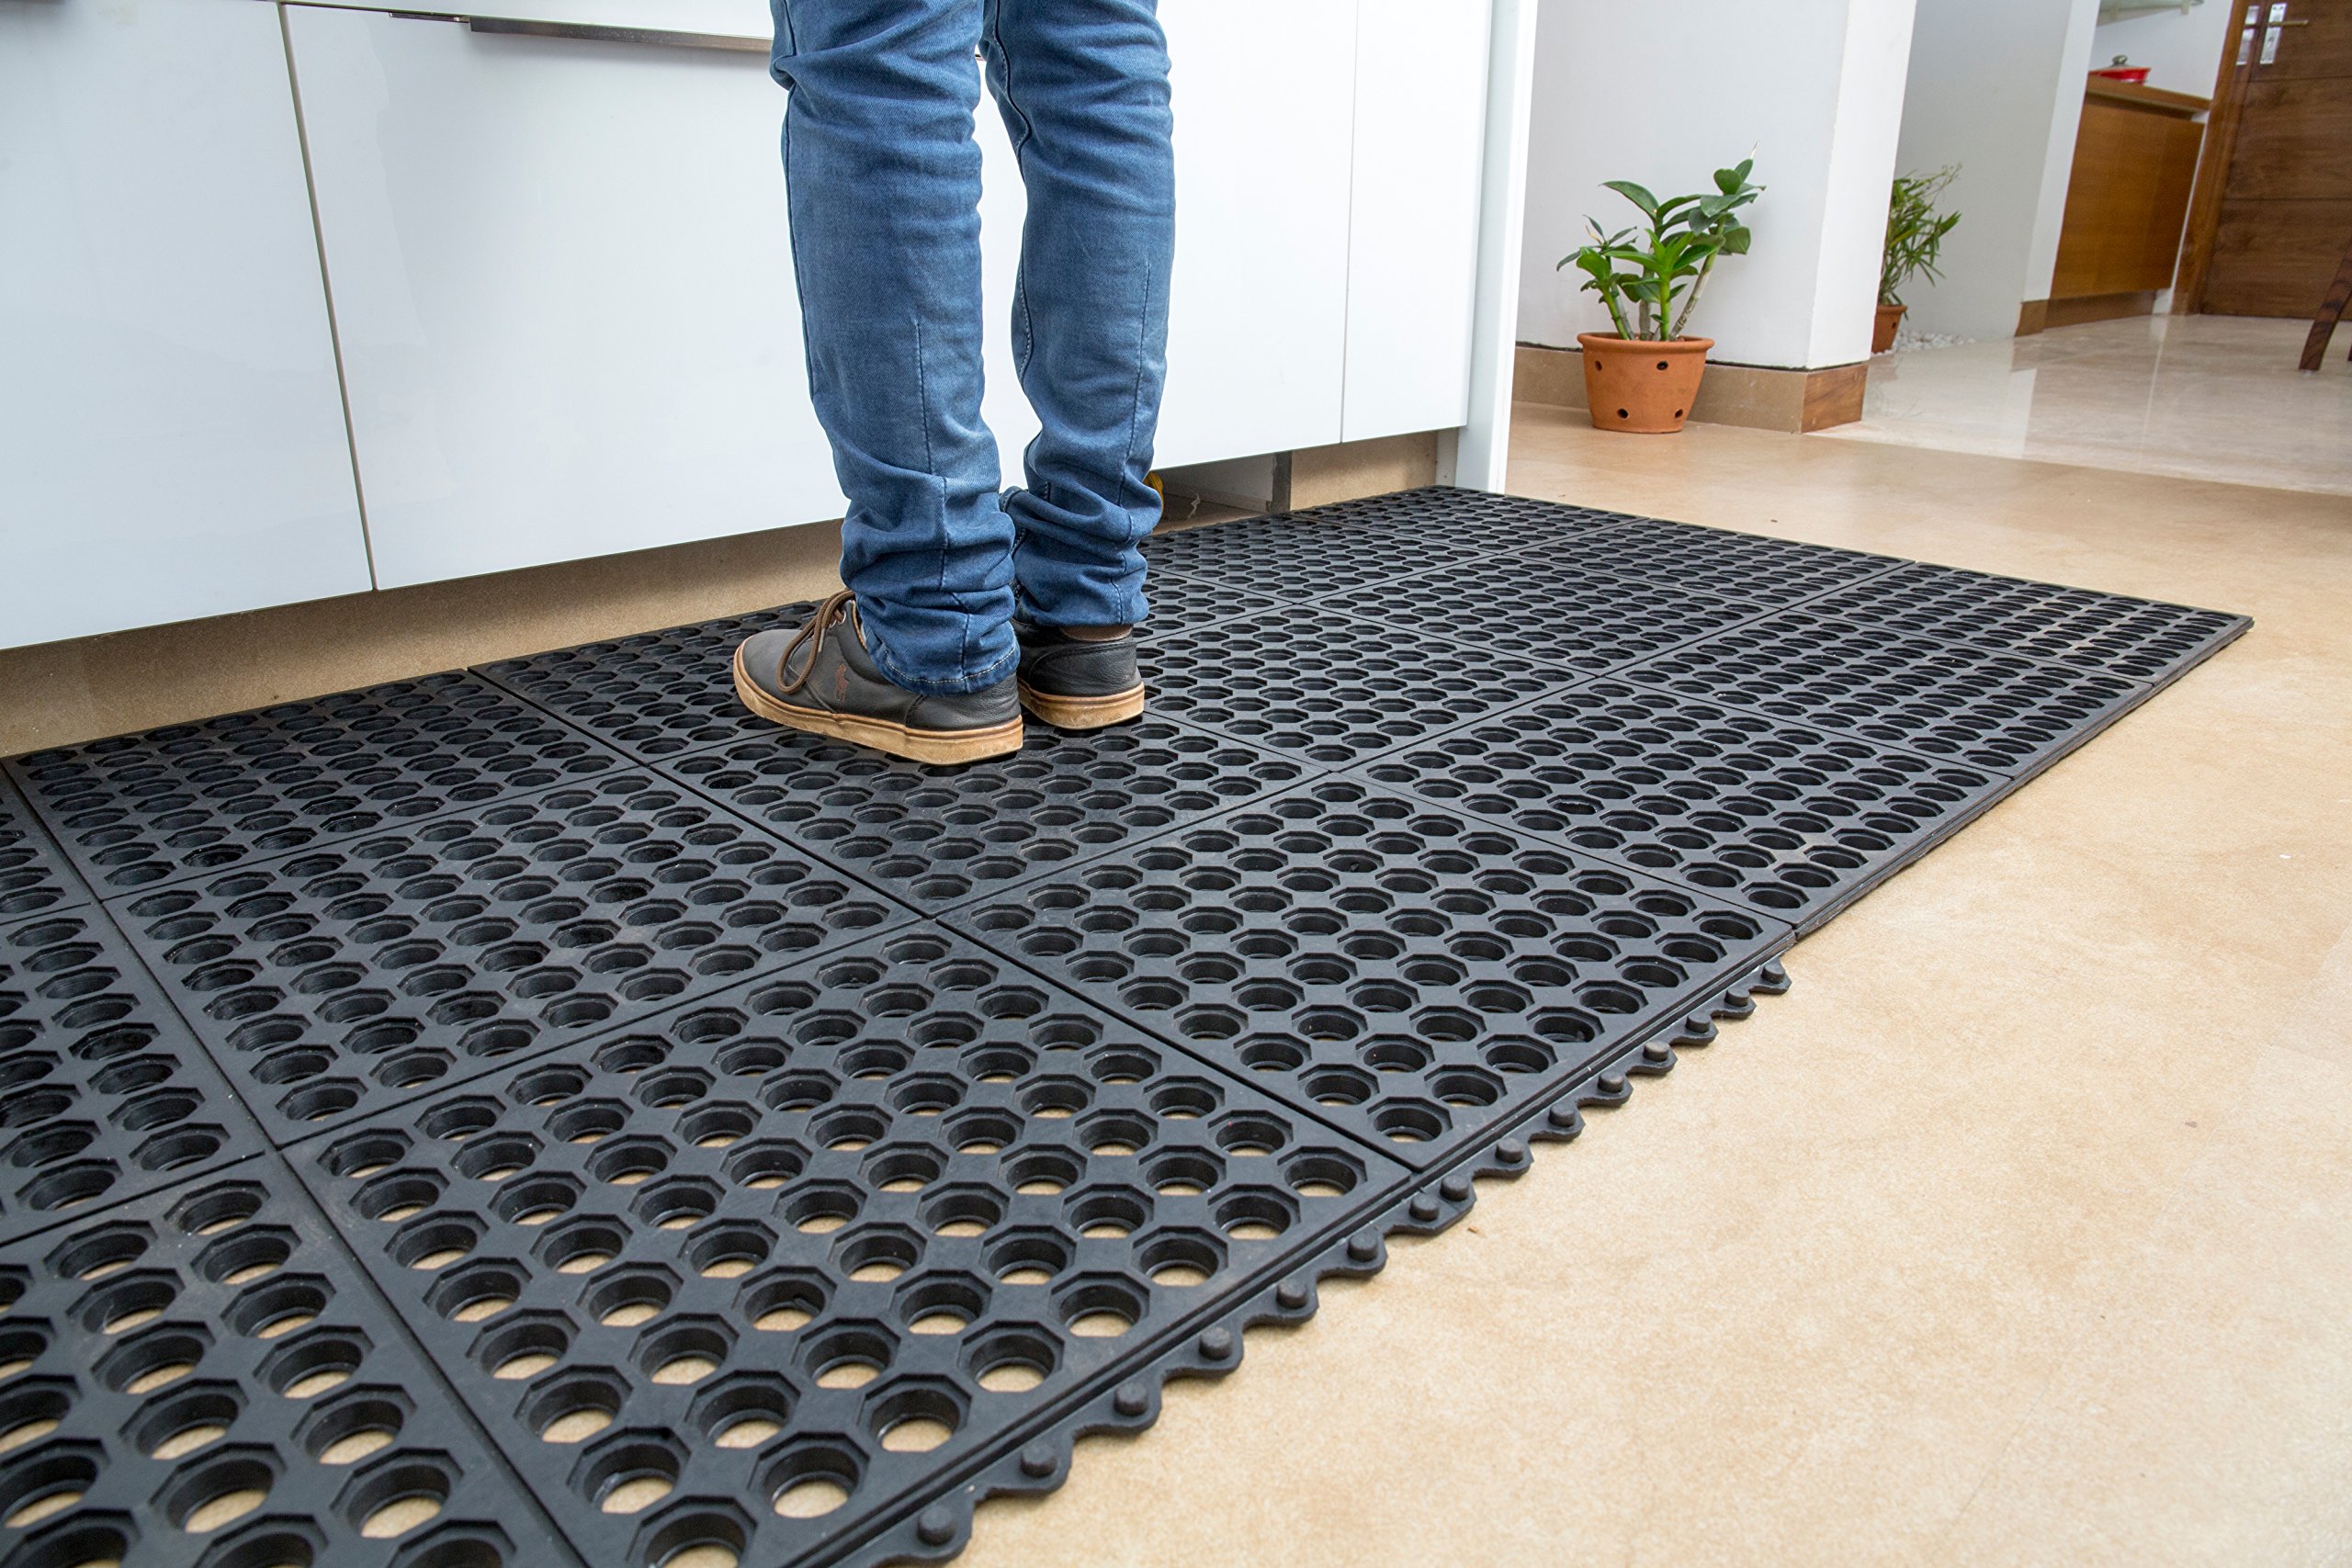 IRONGATE - Anti-Fatigue Drainage Mats - 4 Pack - Rubber - Rugged Sturdy Heavy Duty Commercial Grade - Non Slip Outdoor Indoor Skid Resistant -Restaurant Floor Tile Drain Pool Balcony Yard- 3' x 3'